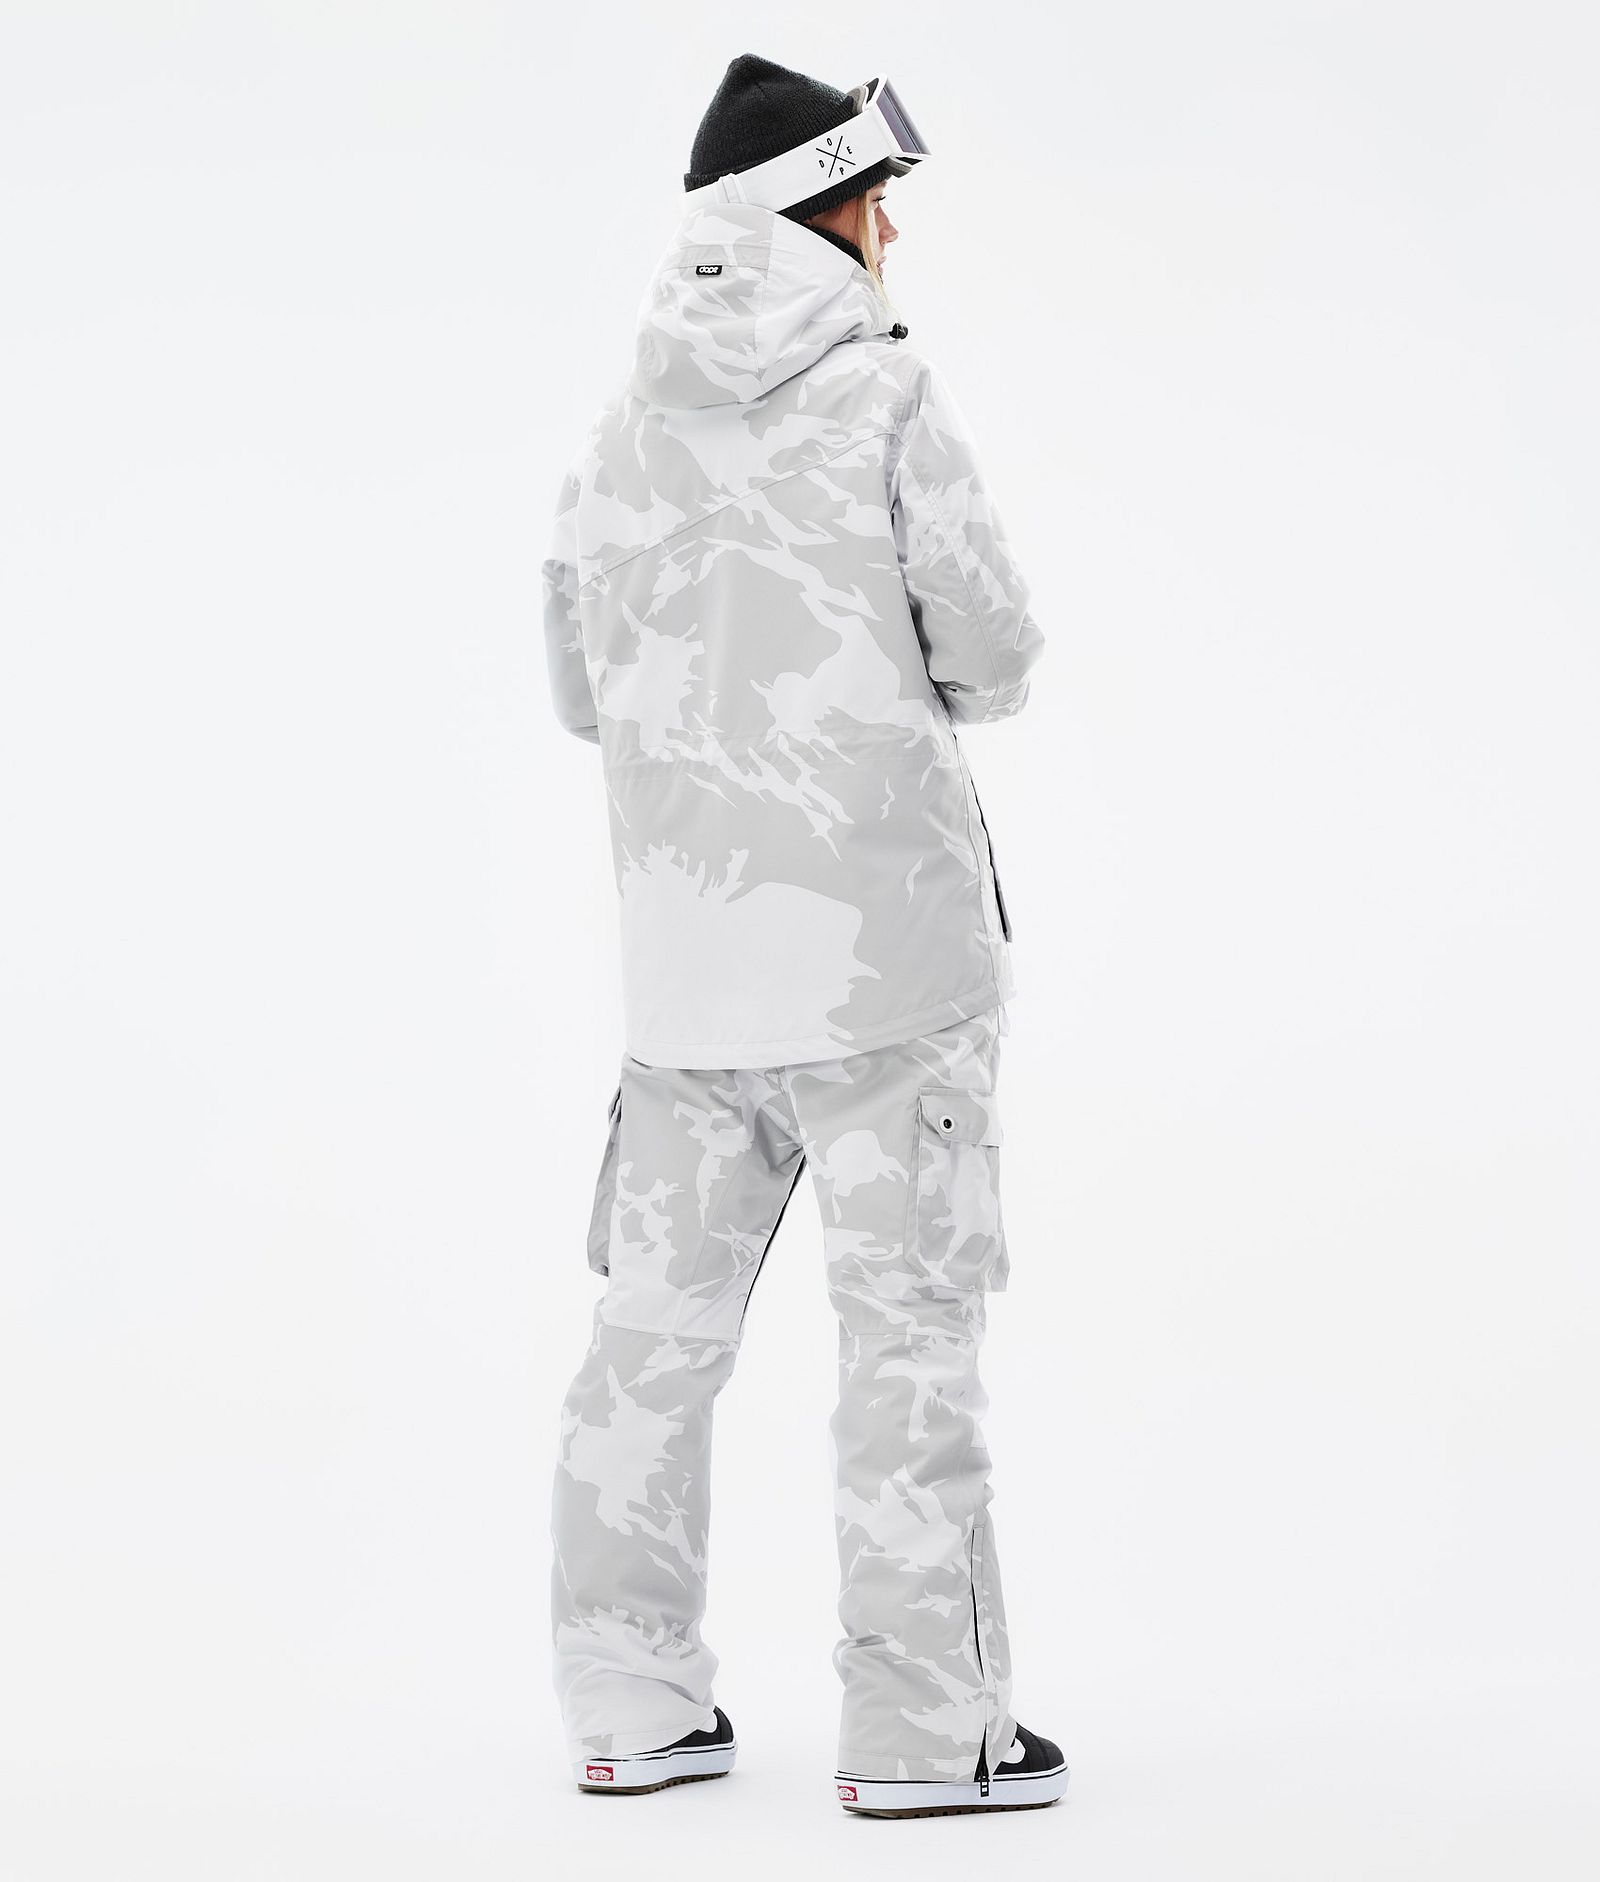 Dope Adept W Outfit Snowboard Femme Grey Camo, Image 2 of 2